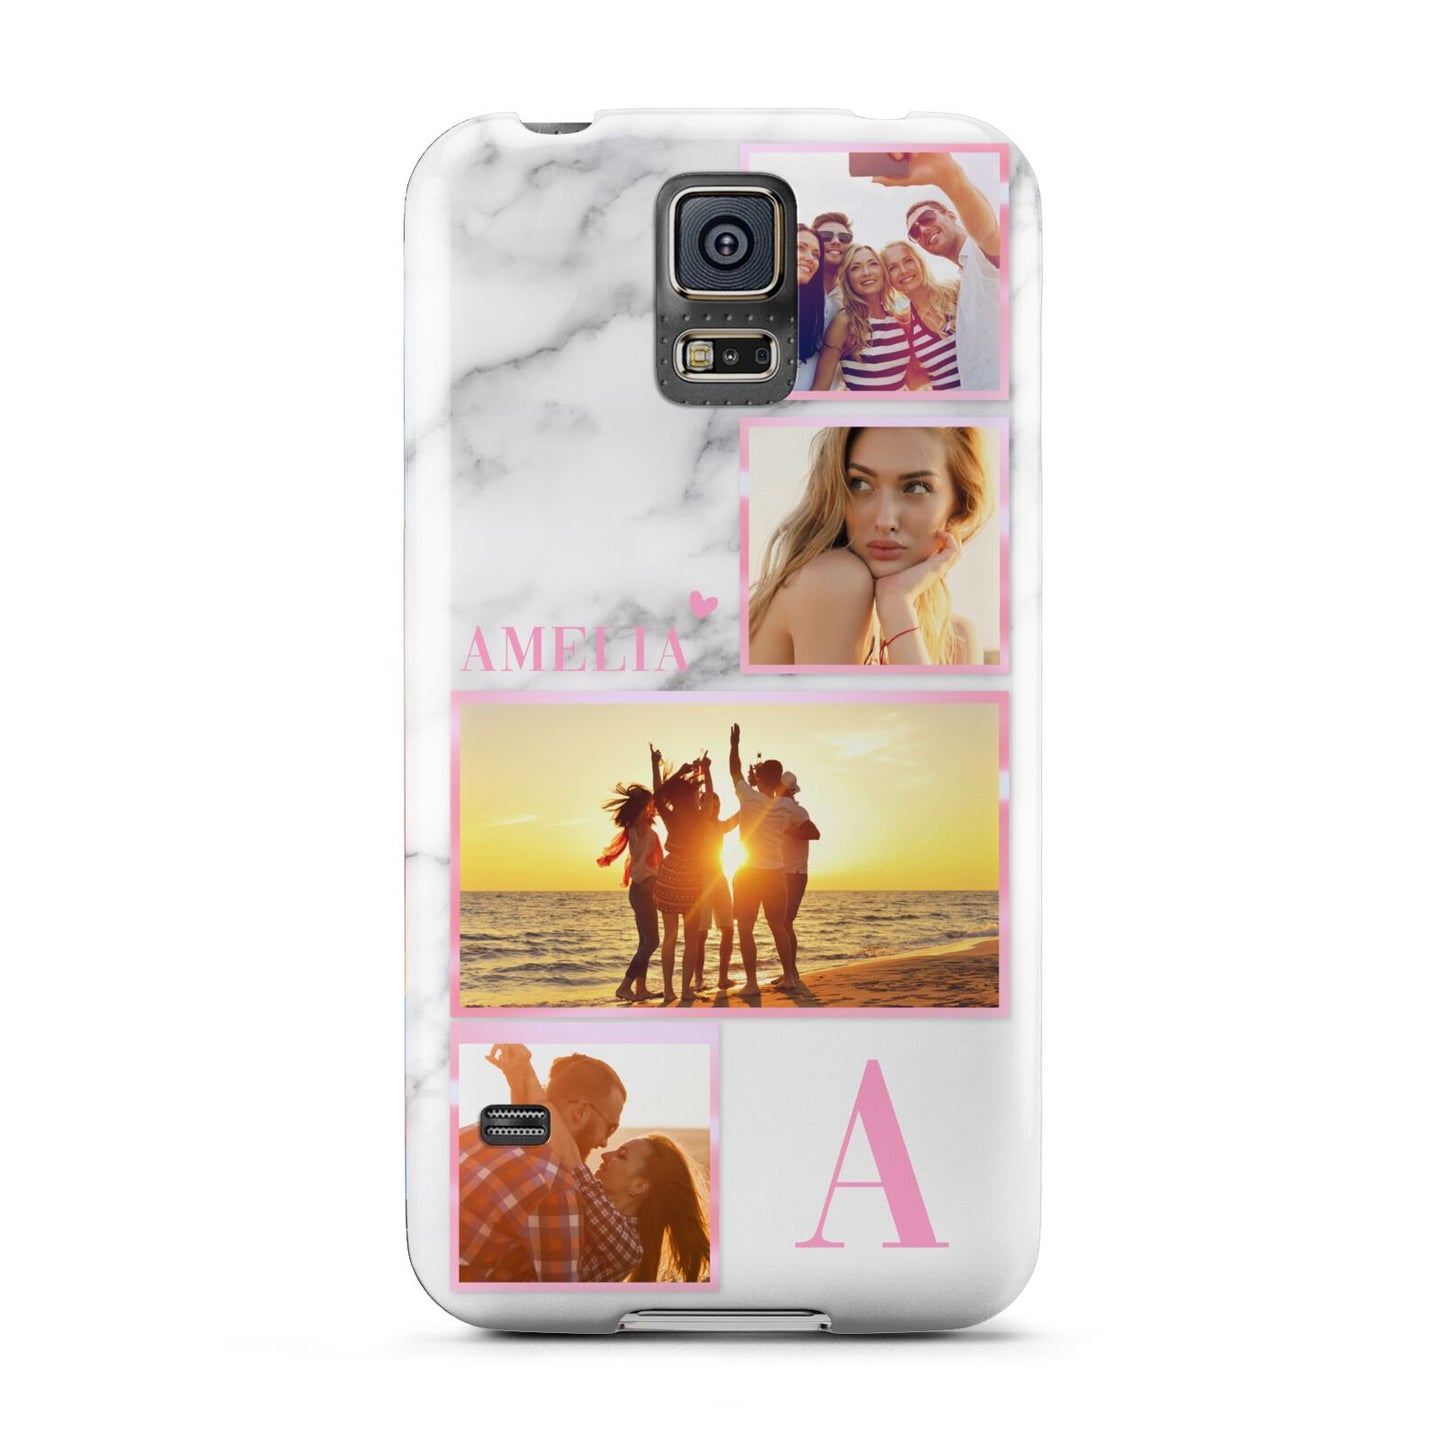 Personalised Marble Photo Collage Samsung Galaxy S5 Case